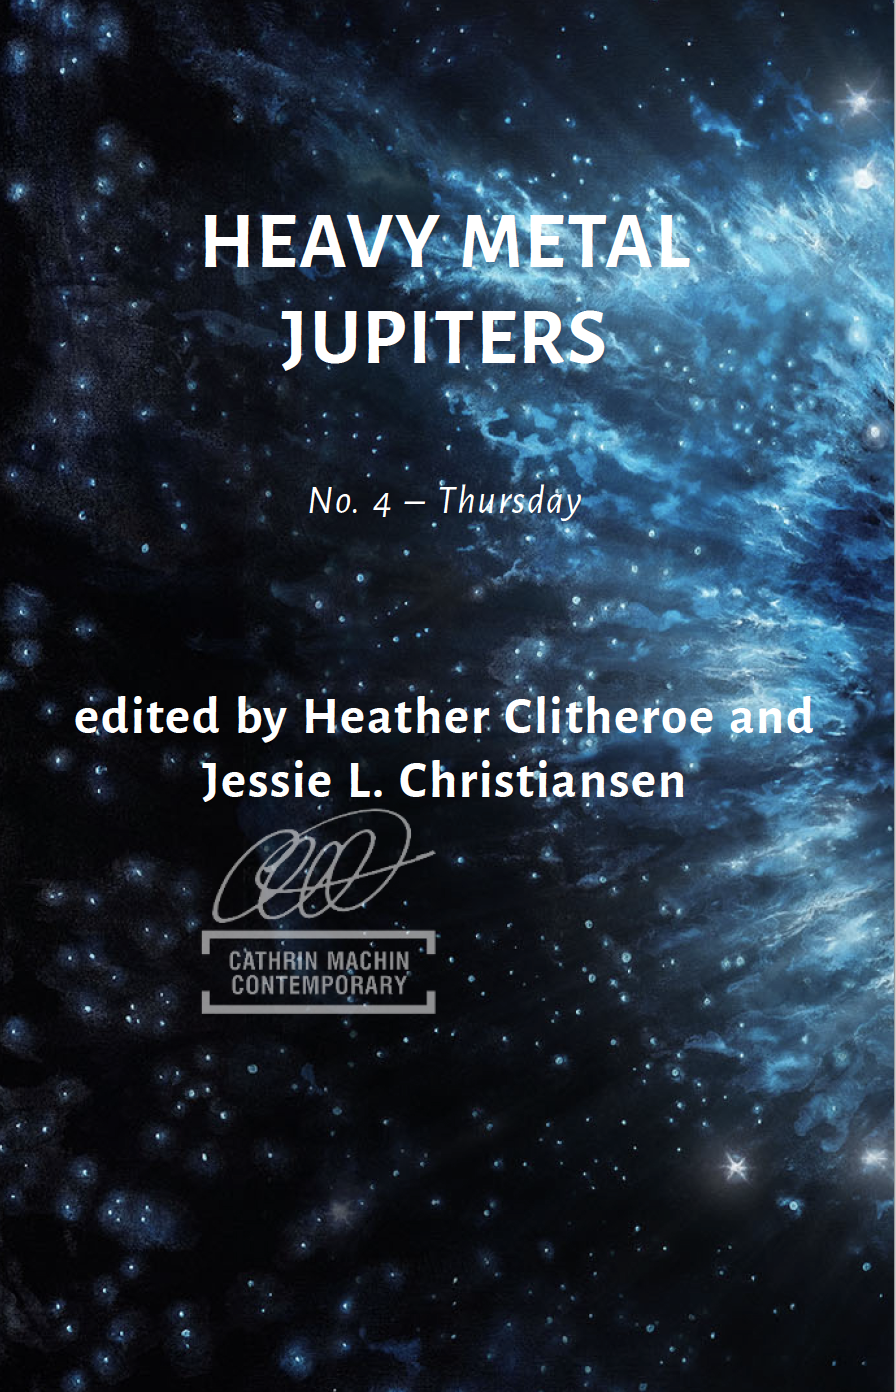 Heavy Metal Jupiters and Other Places - Thursday